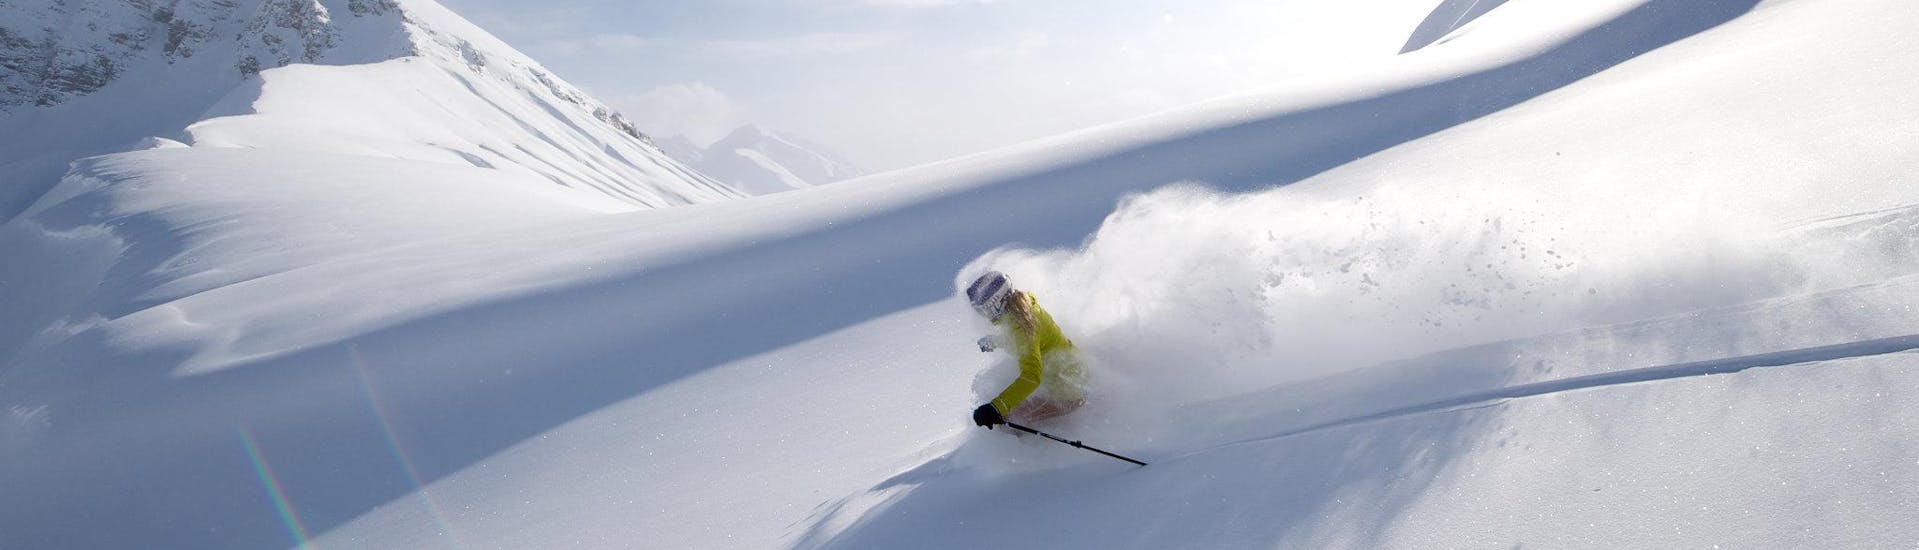 A skier is making his way down a deep powder snow slope during his off piste skiing lessons in Jungfrau Skiregion.